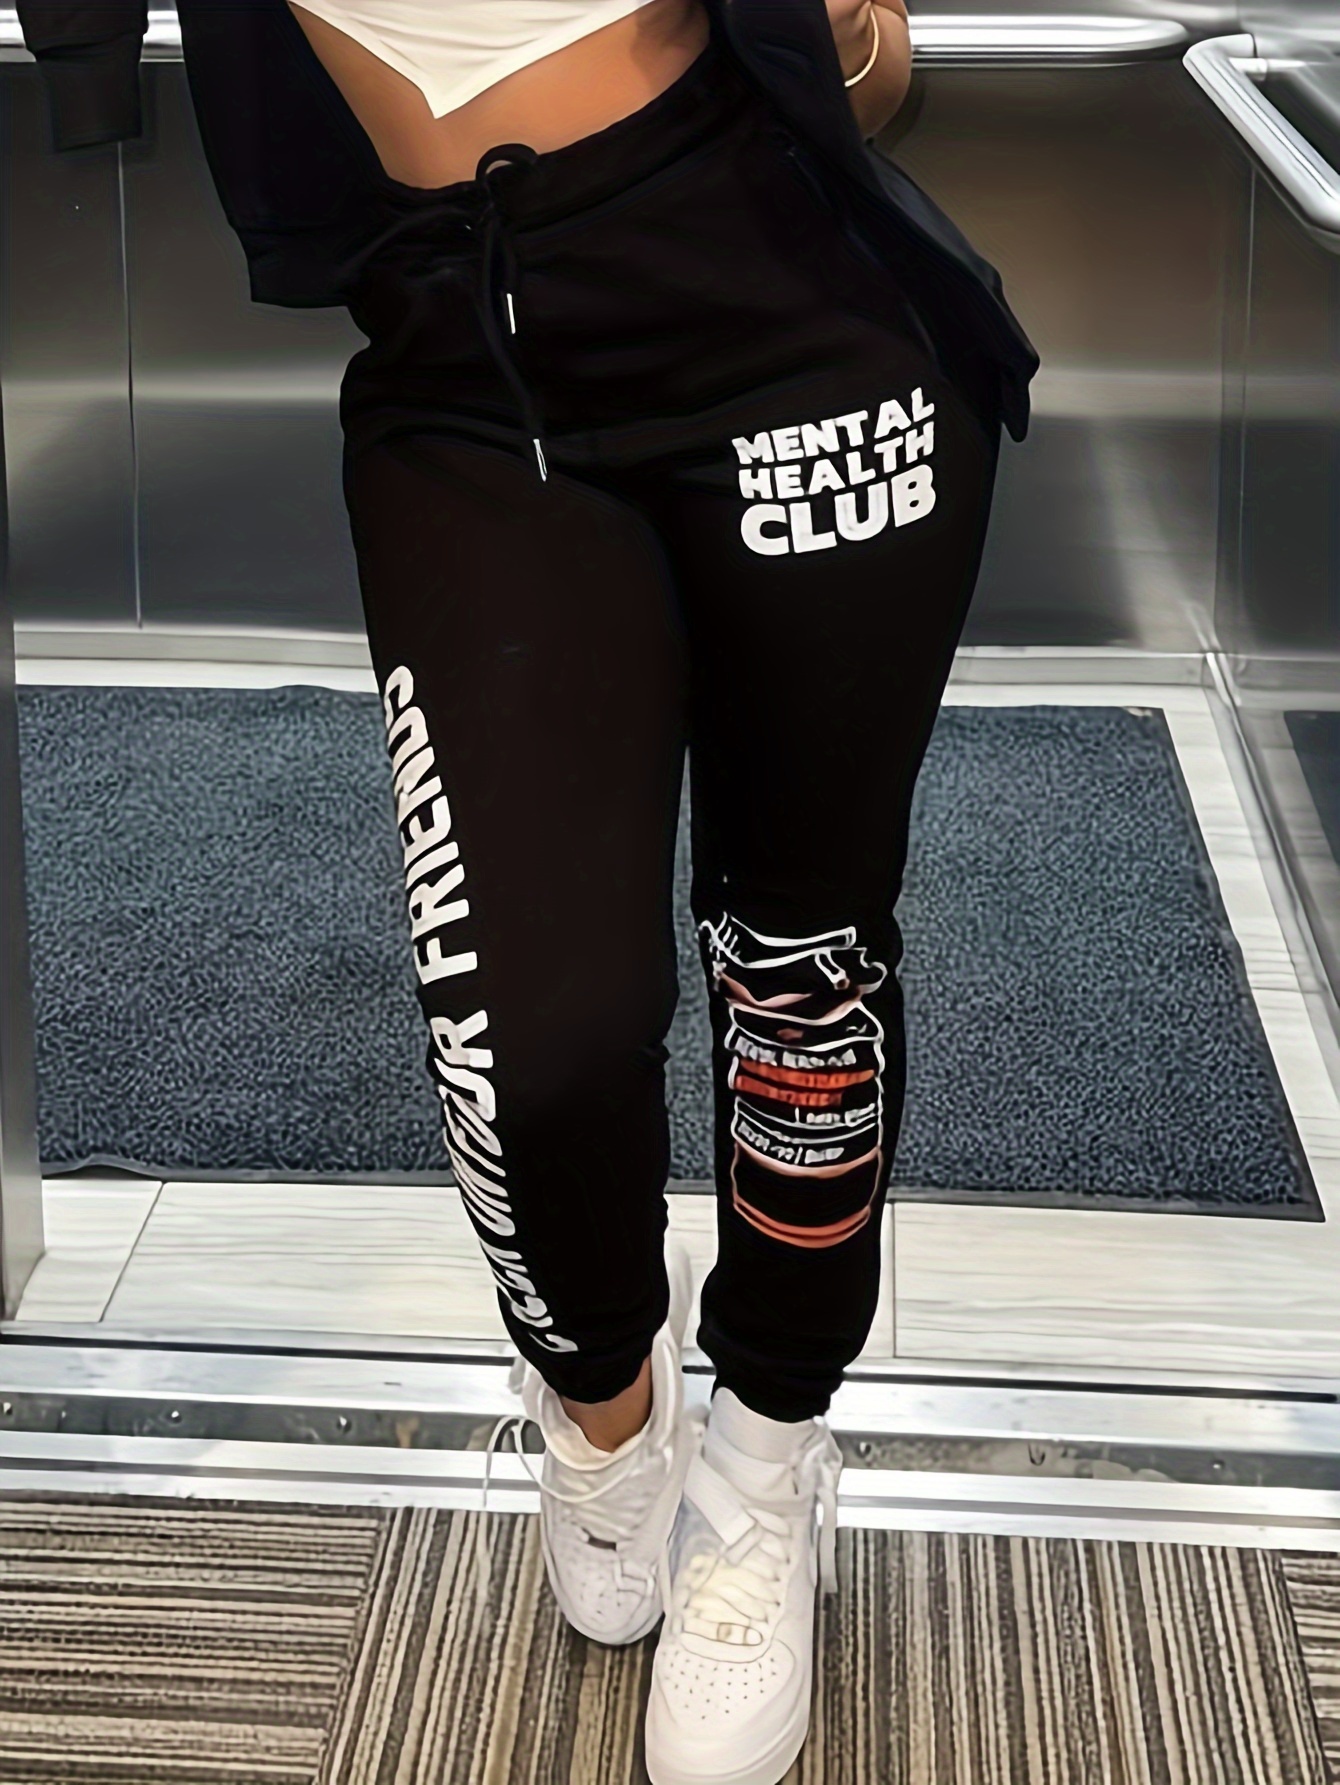 Buy Women High-Rise Joggers with Elasticated Drawstring Waist